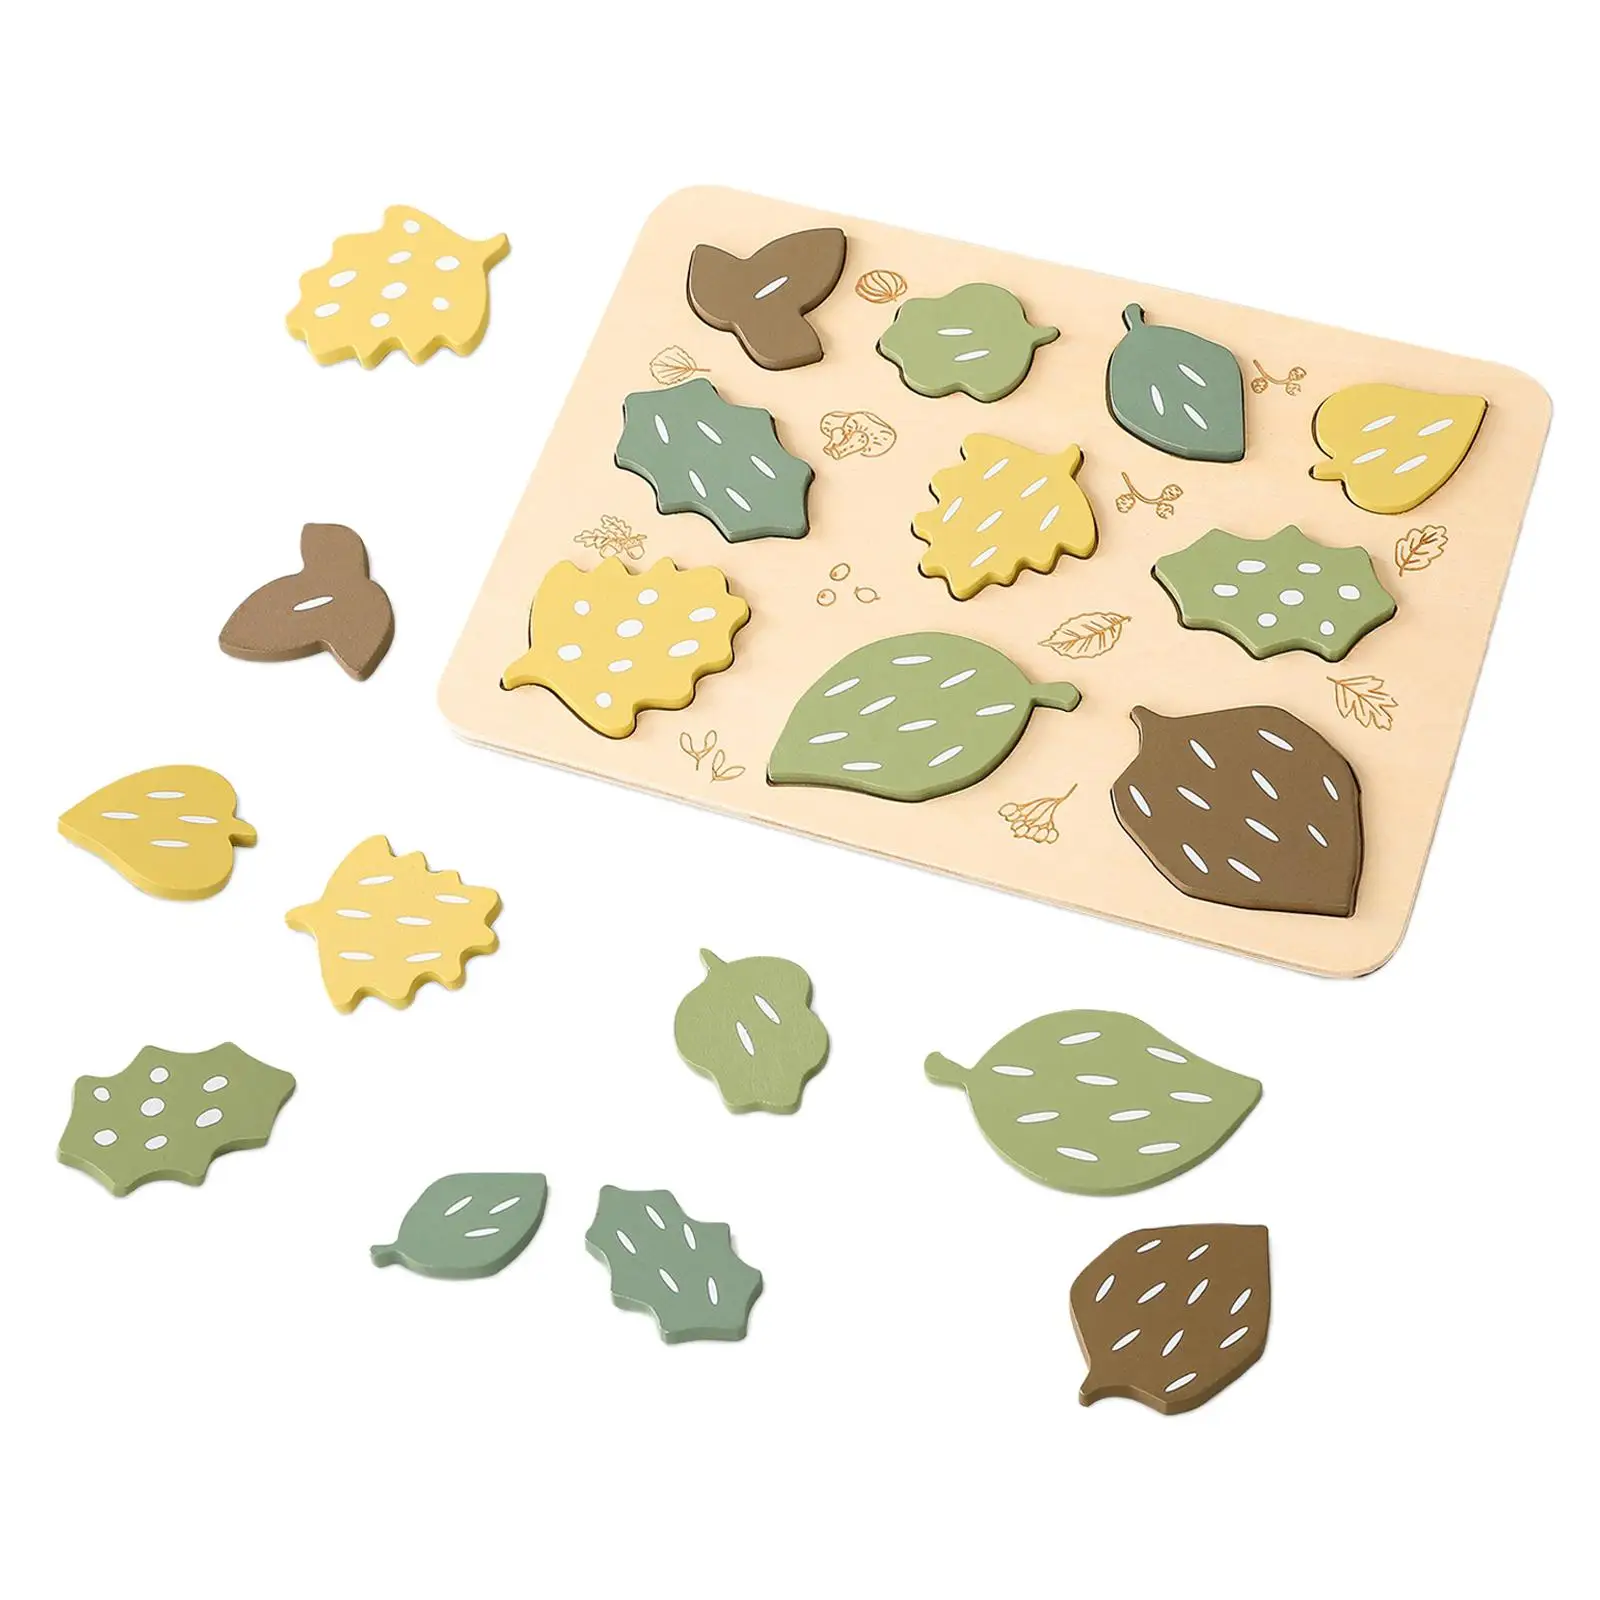 Leaf  Jigsaw Puzzles Hand Eye Coordination Counting Puzzle for Preschool